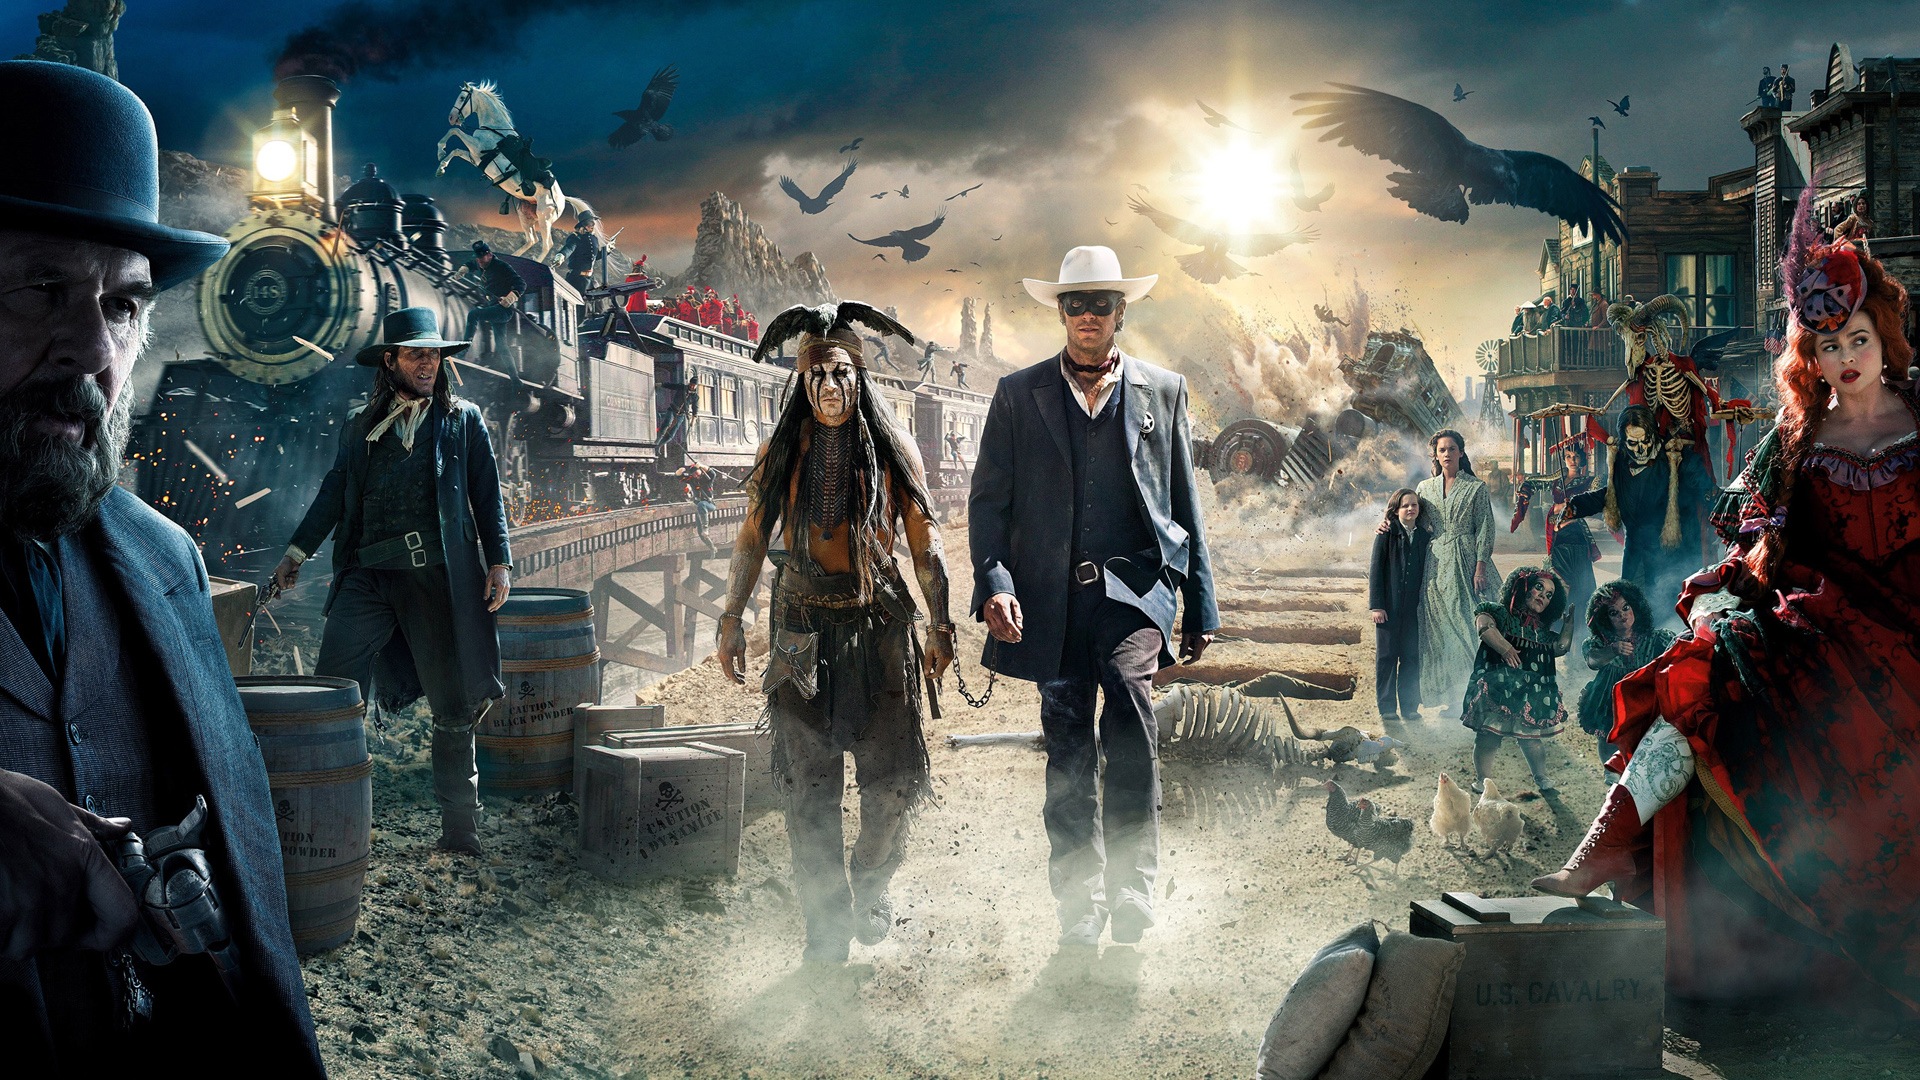 The Lone Ranger HD movie wallpapers #20 - 1920x1080